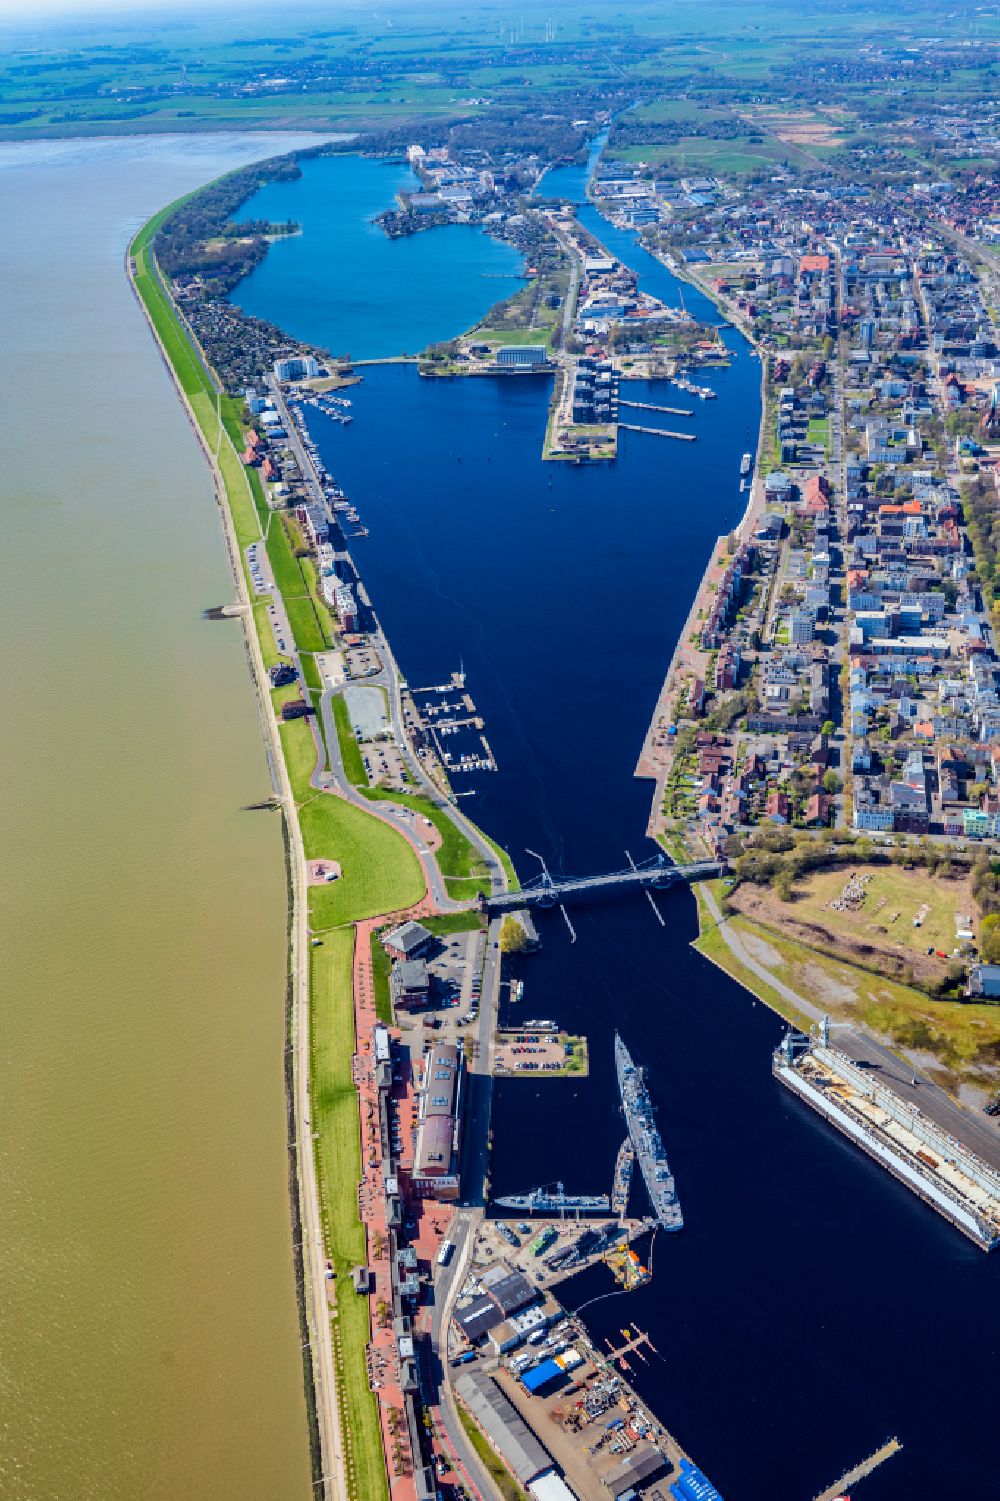 Wilhelmshaven from above - Marina with recreational marine jetties and moorings on the shore area of the pumping station cultural center in Wilhelmshaven in Lower Saxony